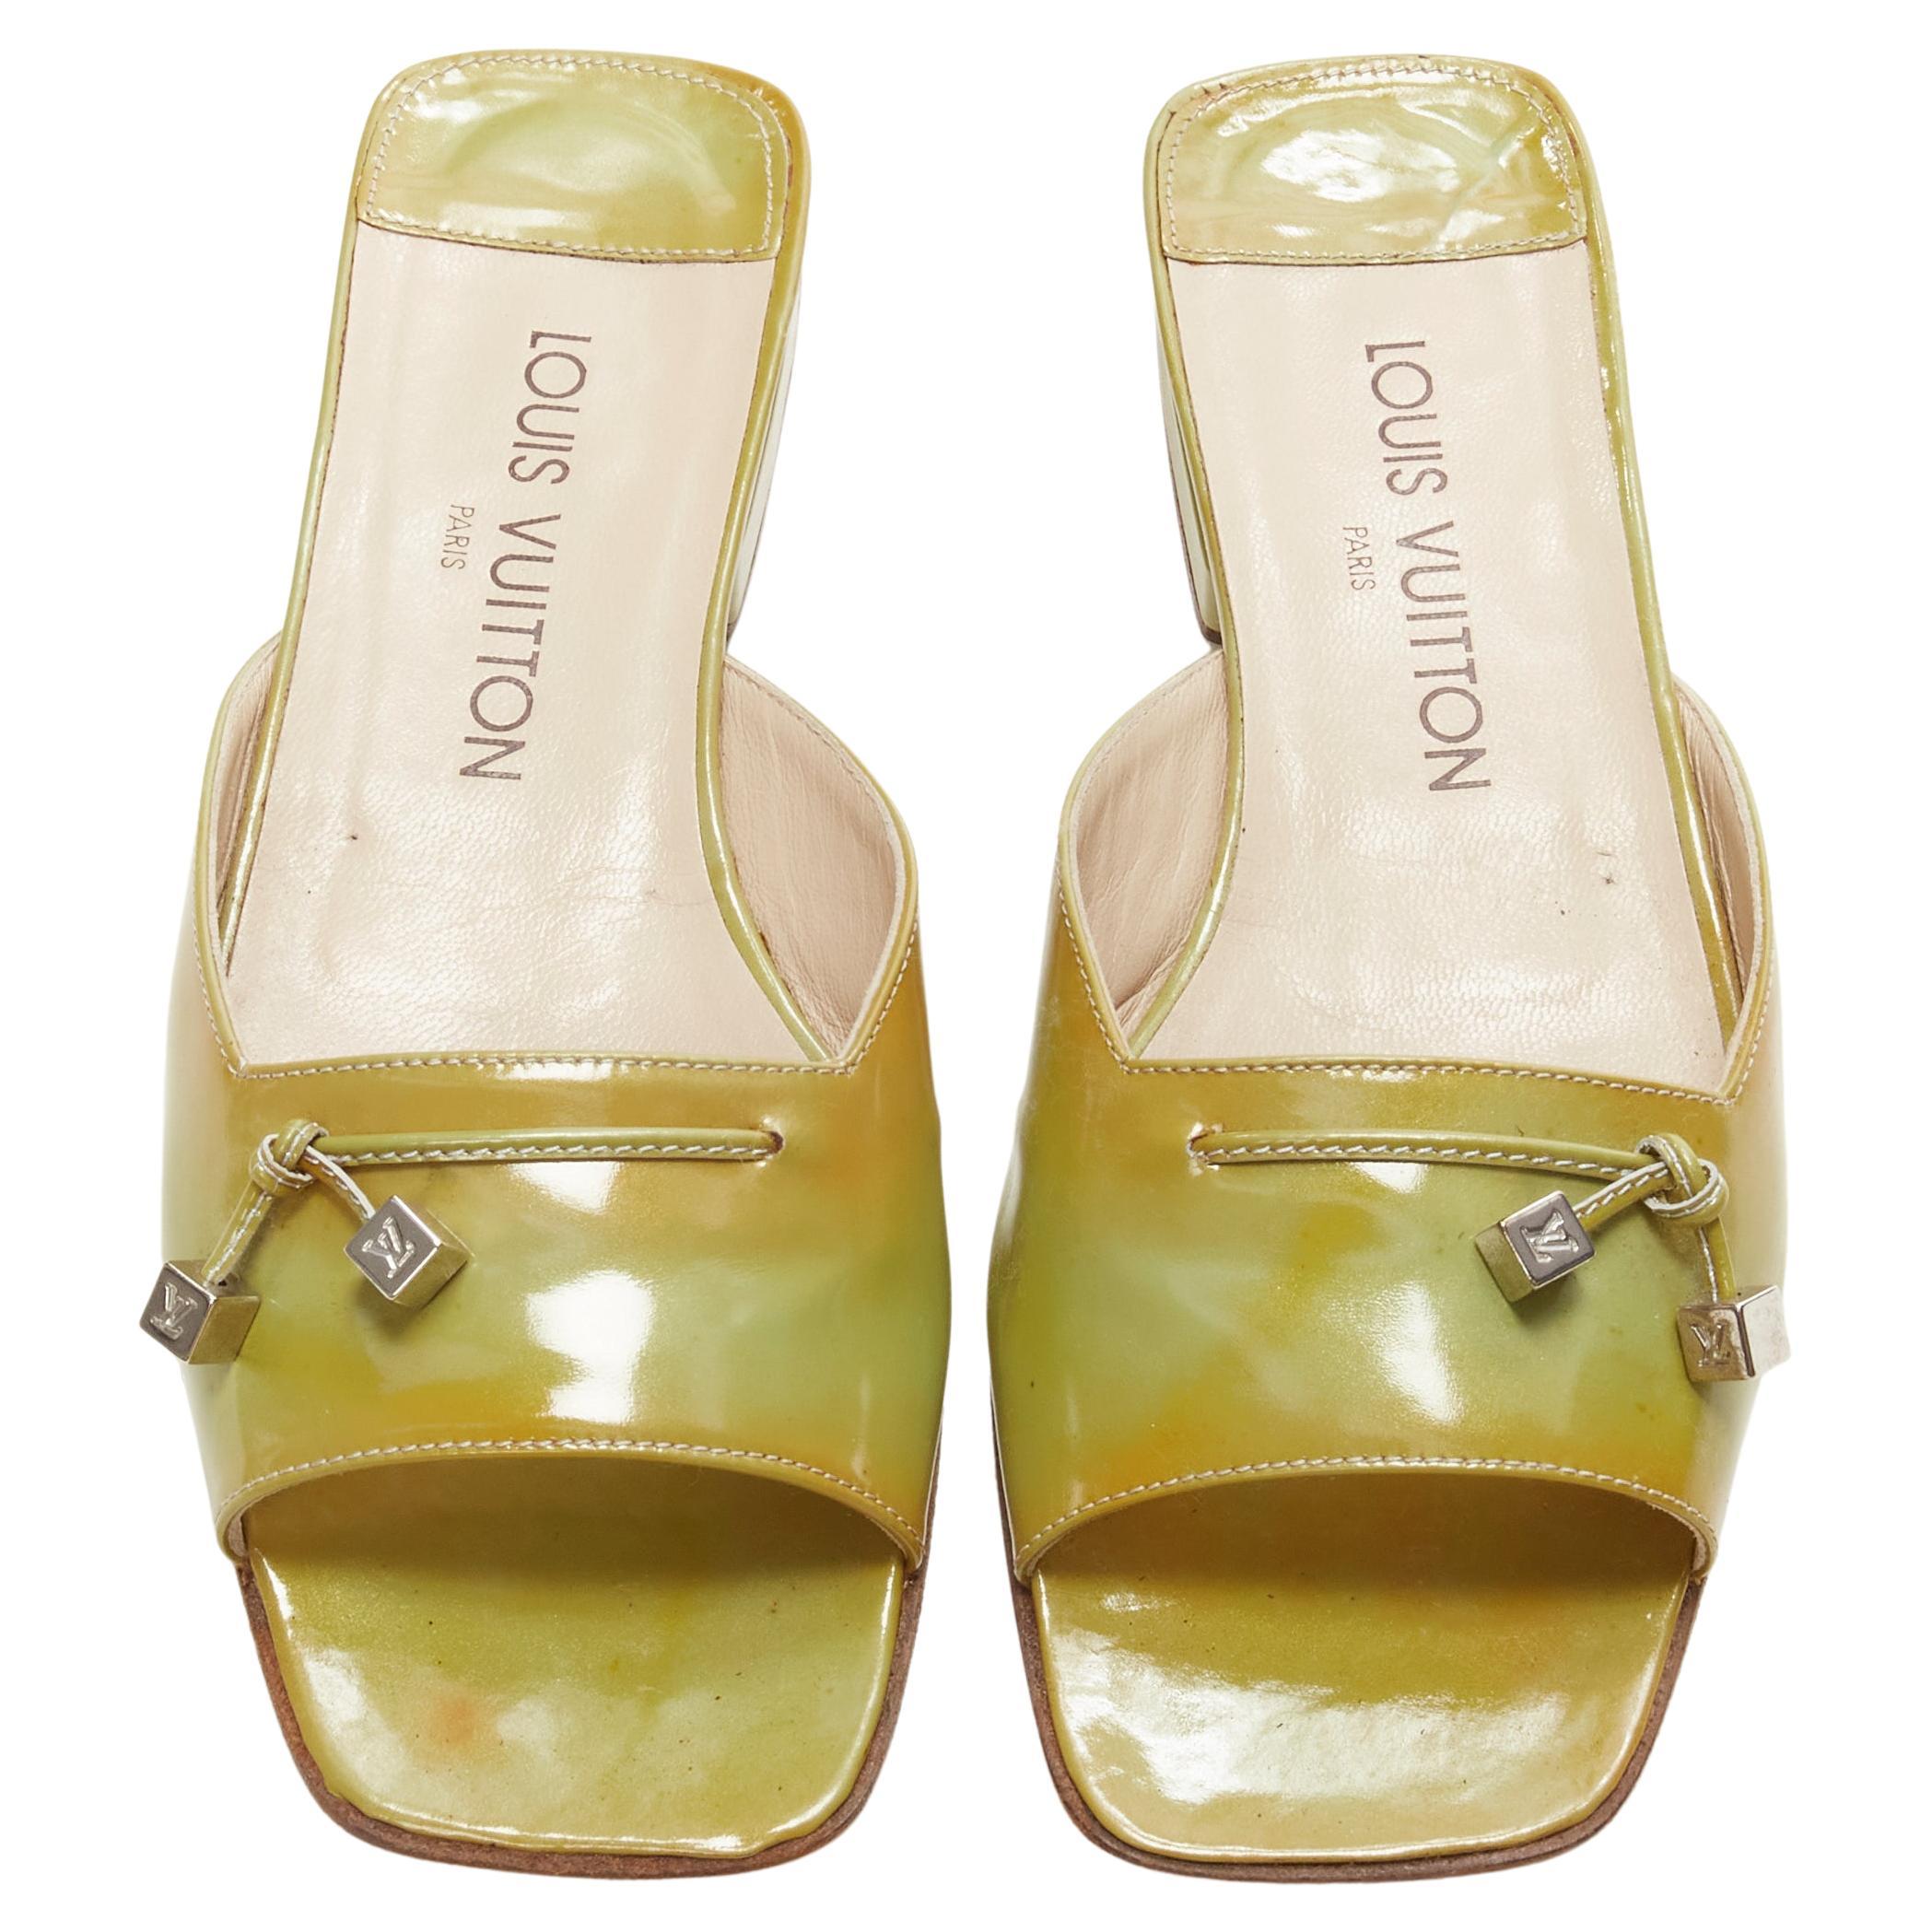 LOUIS VUITTON green yellow polished leather LV dice square toe slipper EU37 For Sale